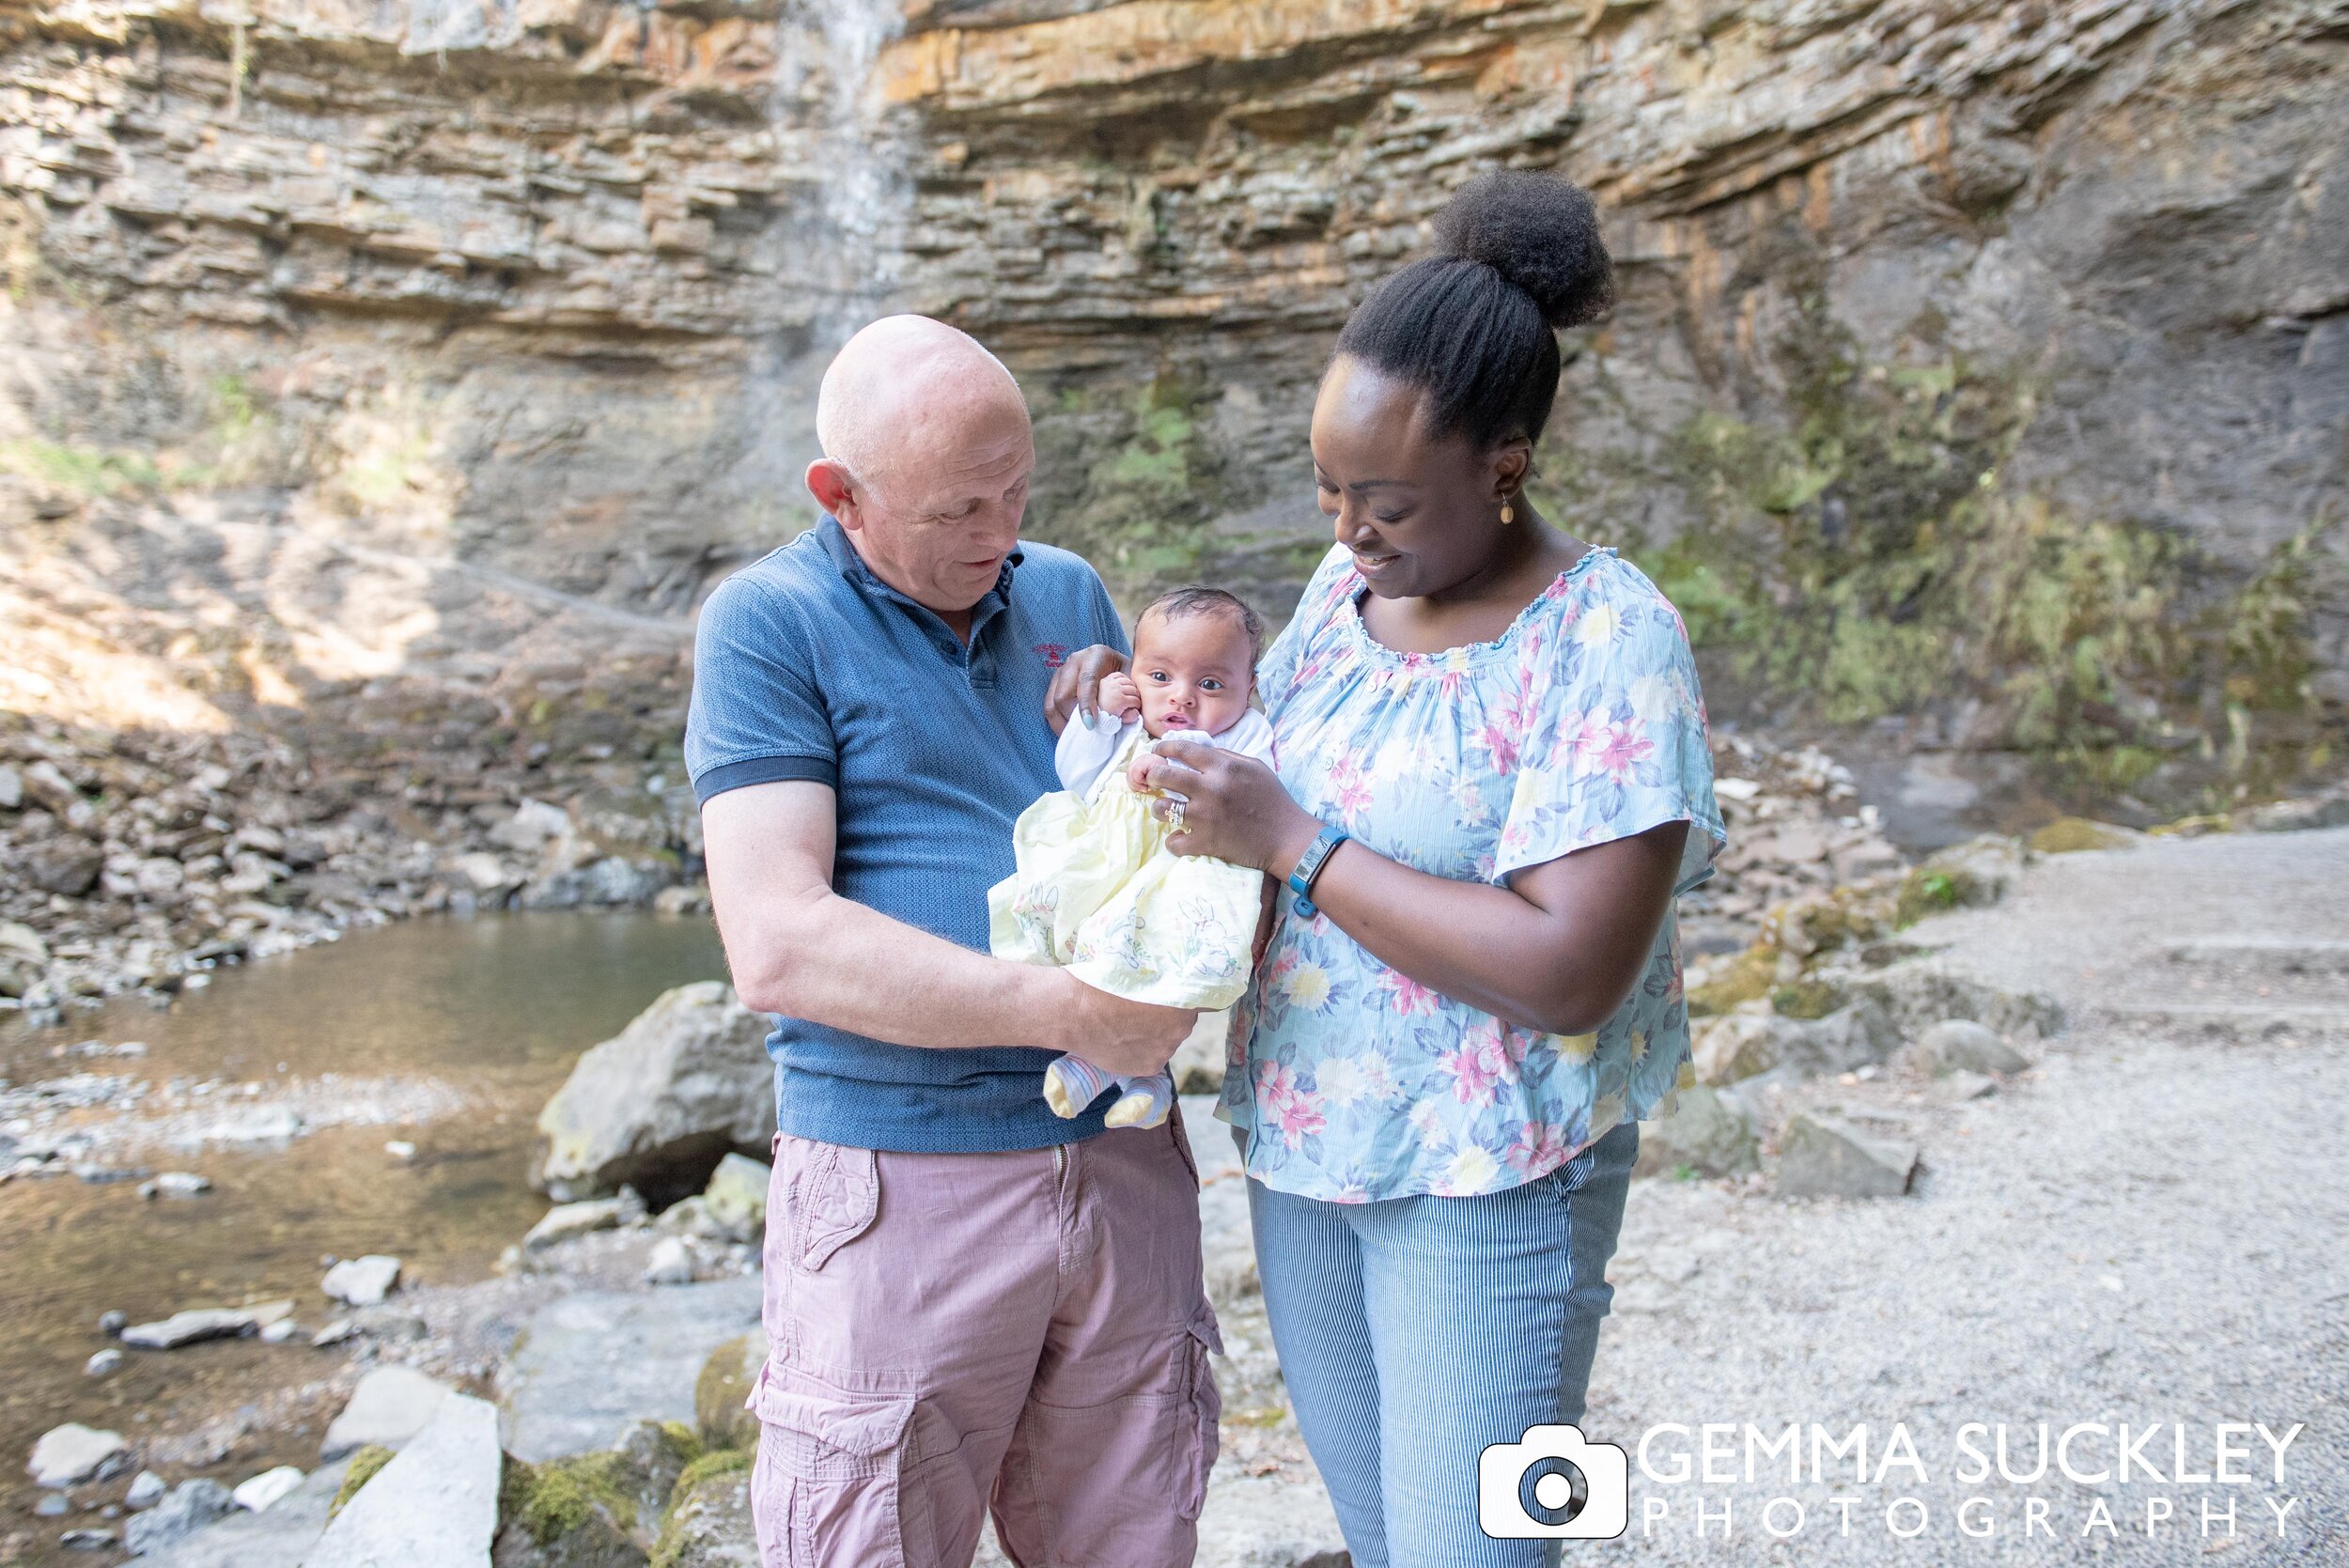 natural family photo at hardraw force by gemma suckley photography